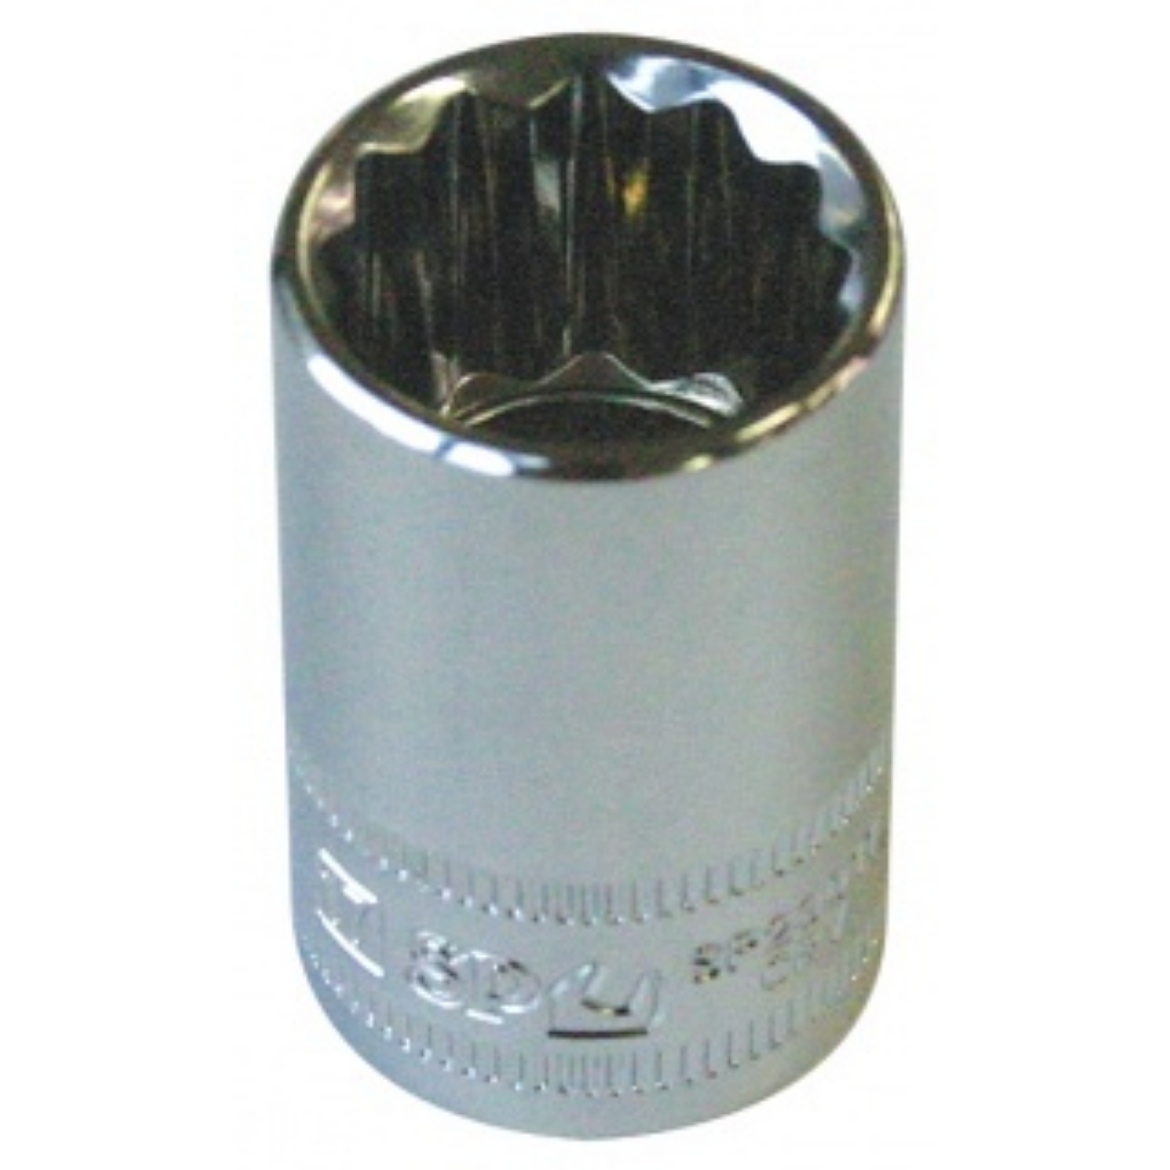 Picture of SOCKET 1/2"DR 12PT METRIC 30MM SP TOOLS